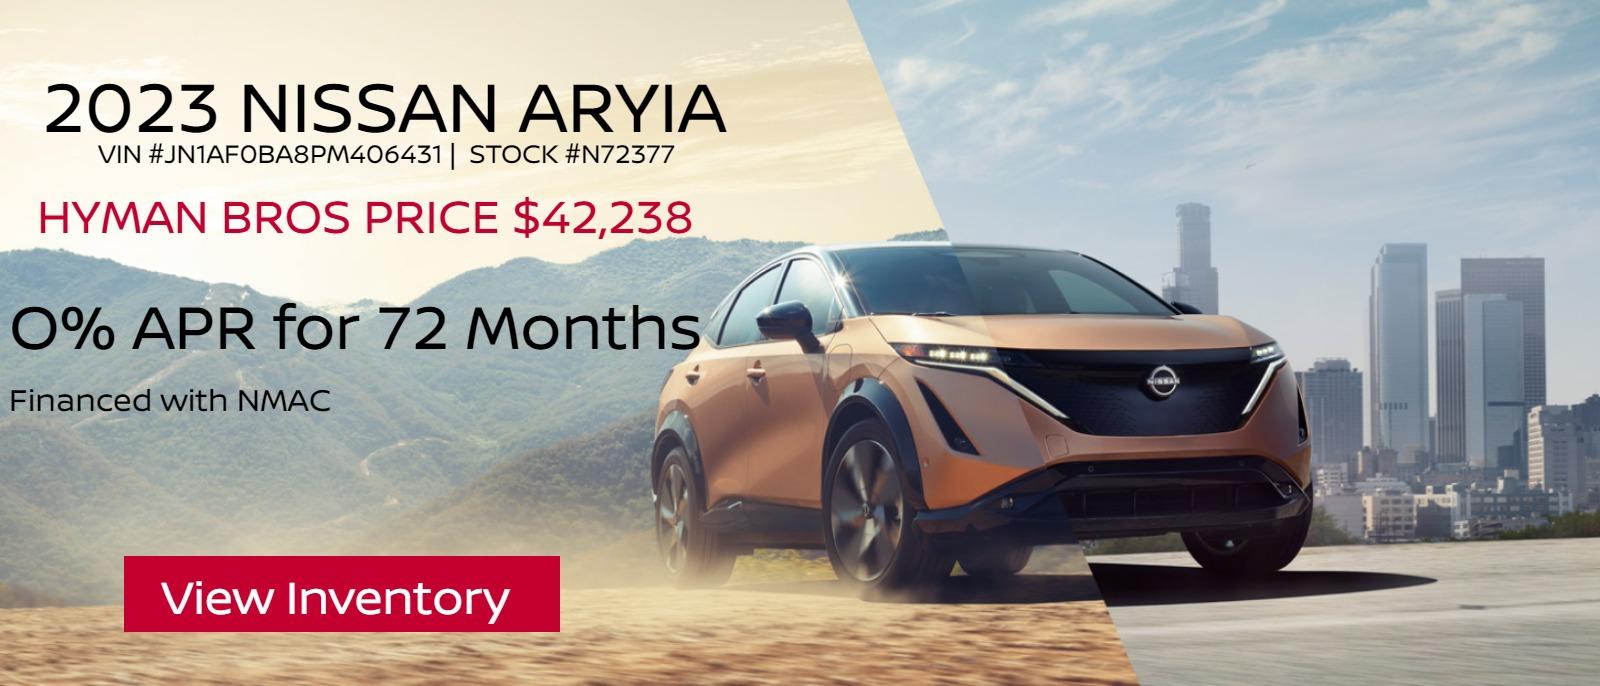 2023 Aryia Lease Special 3 years $3000 down $399 Per Month Offer applies to VIN JN1AF0BA8PM406431 STOCK NUMBER N72377